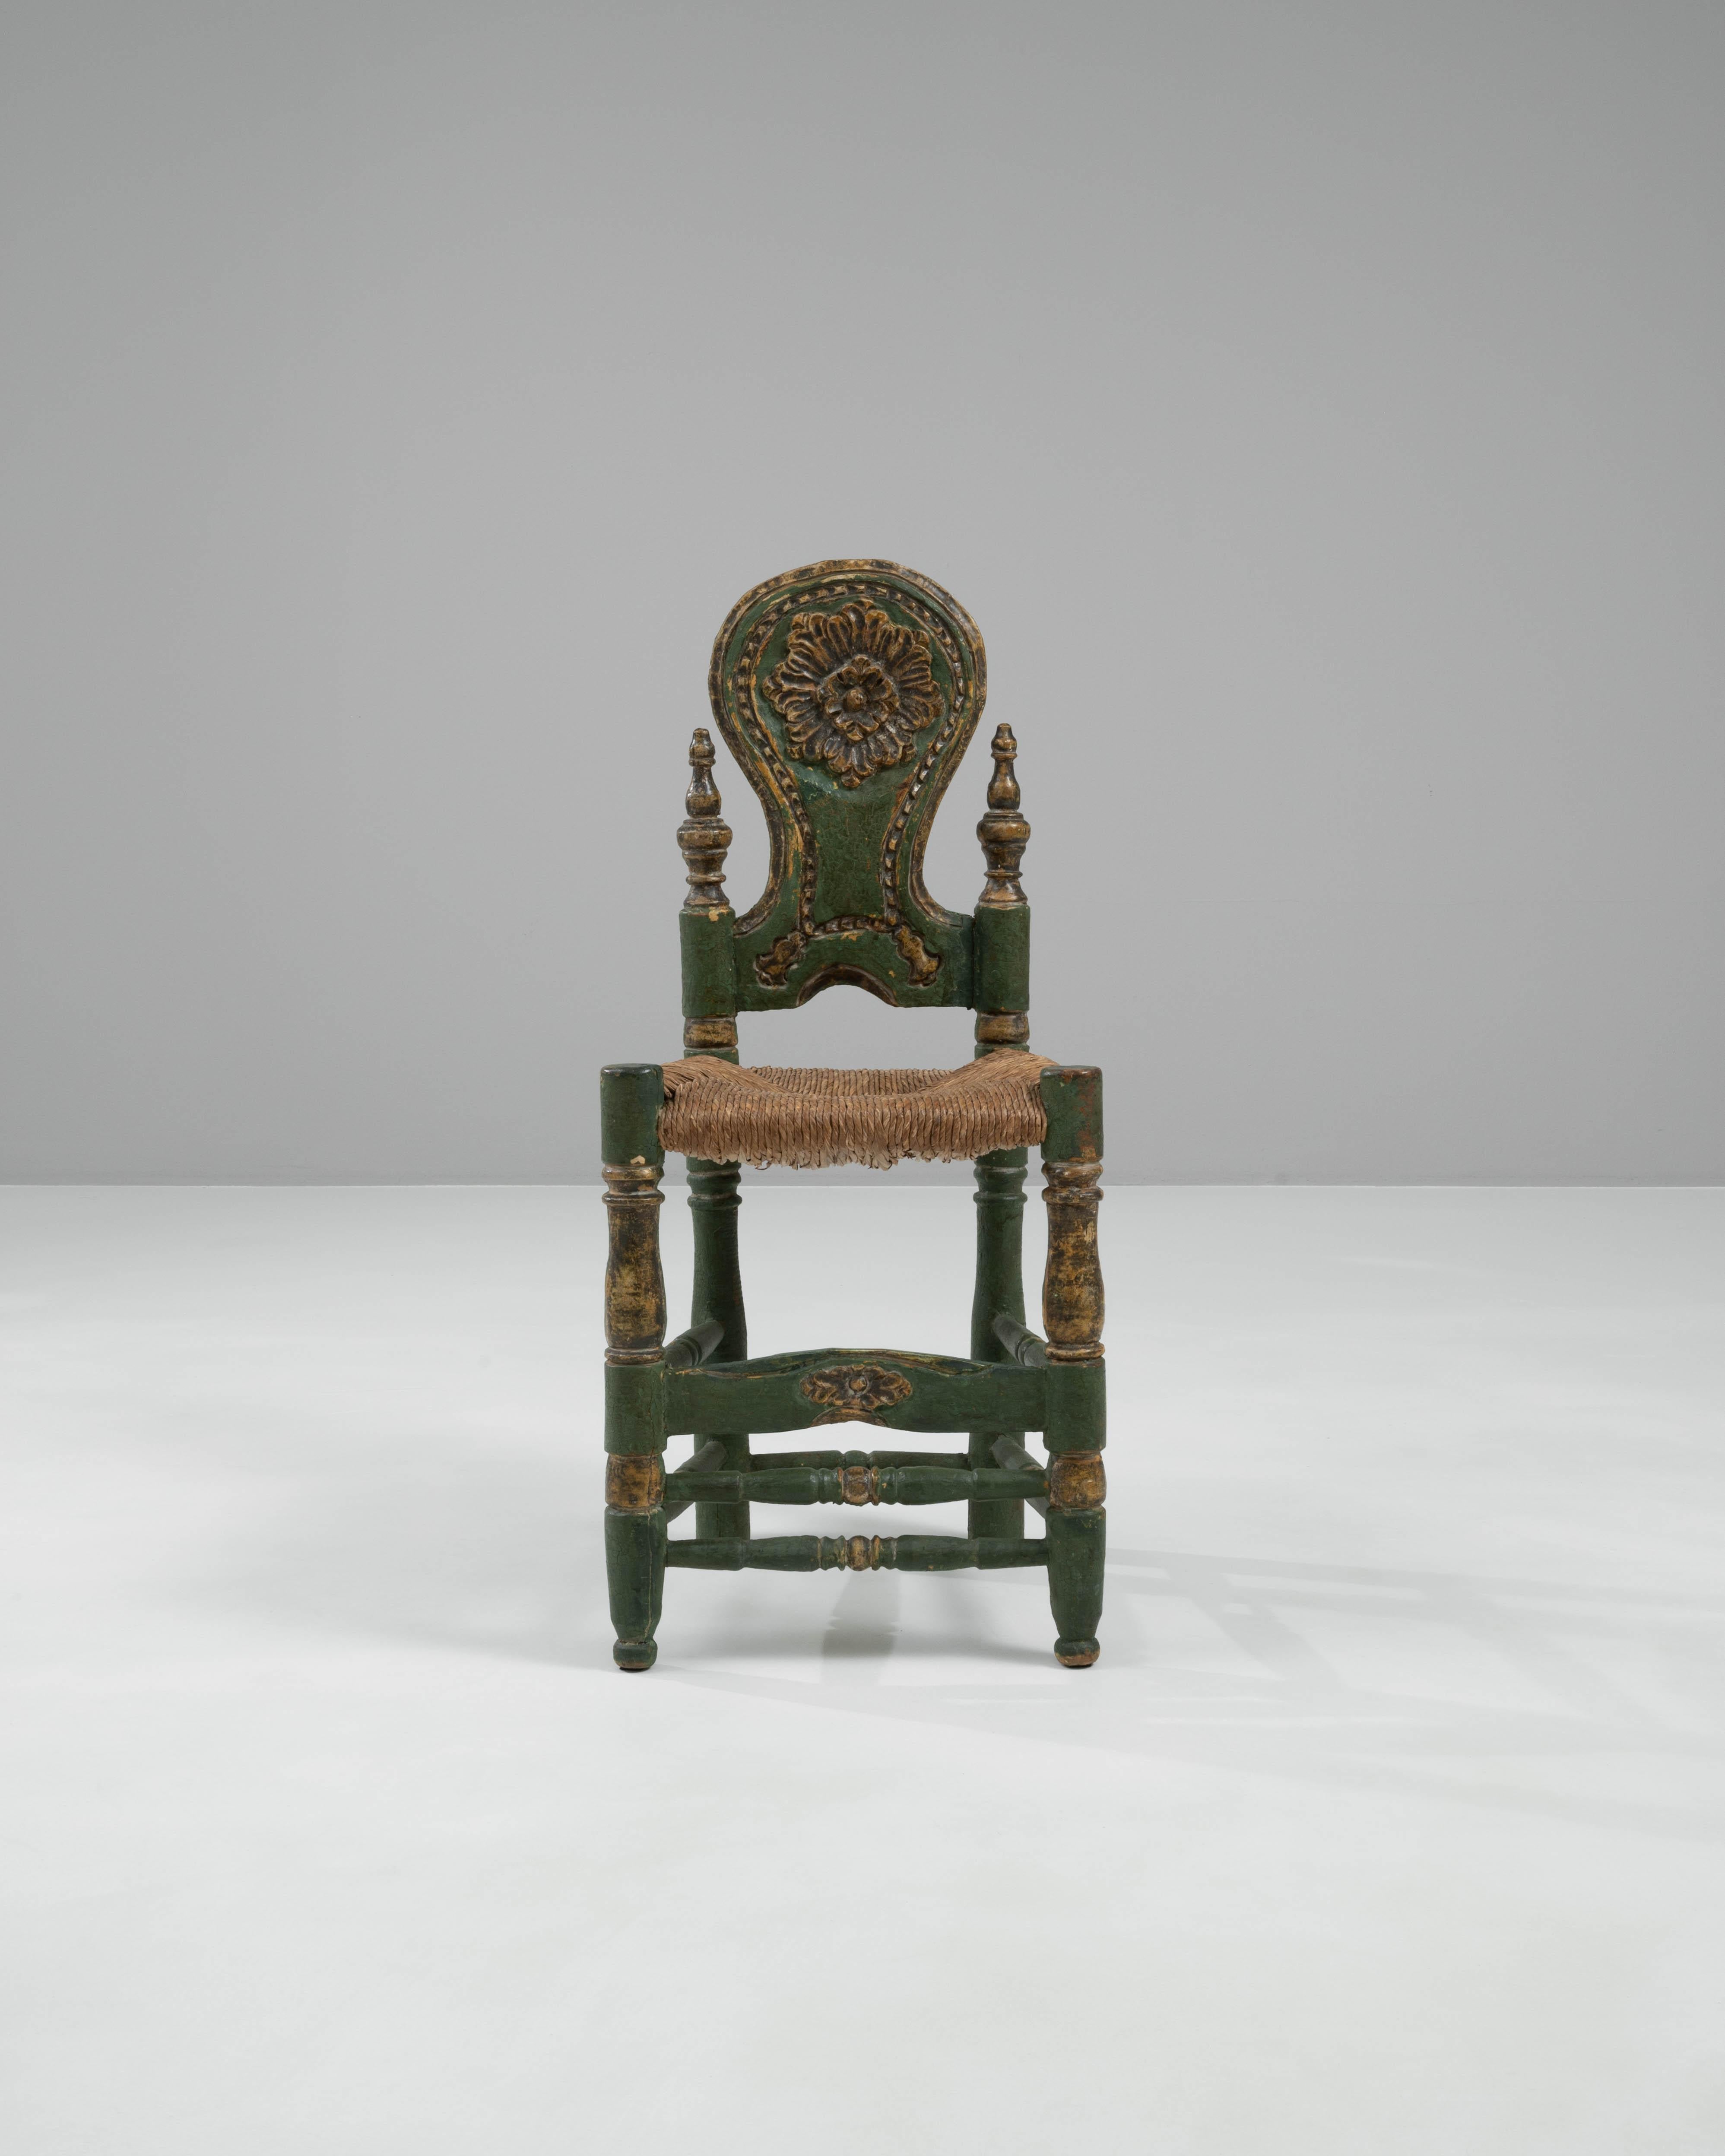 Add a splash of vintage charm to your décor with this 20th Century Italian Wooden Chair. Crafted with attention to detail, this chair features an eye-catching green finish with natural distressing that enhances its antique look. The intricate,